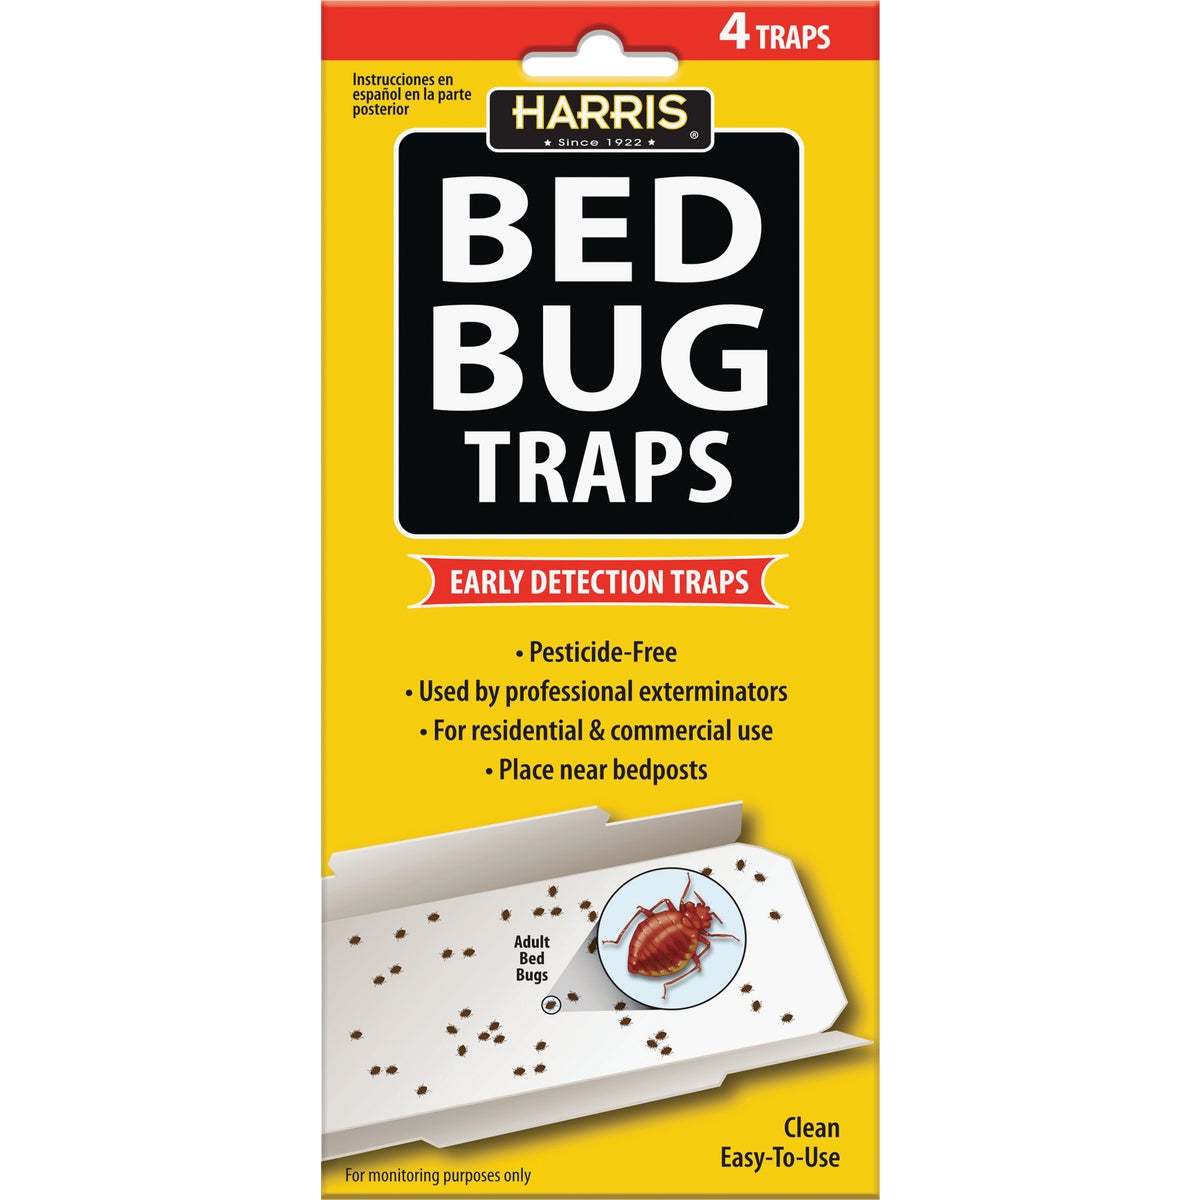 Item 701739, Natural, pesticide-free traps use 25 specially formulated lures that are 